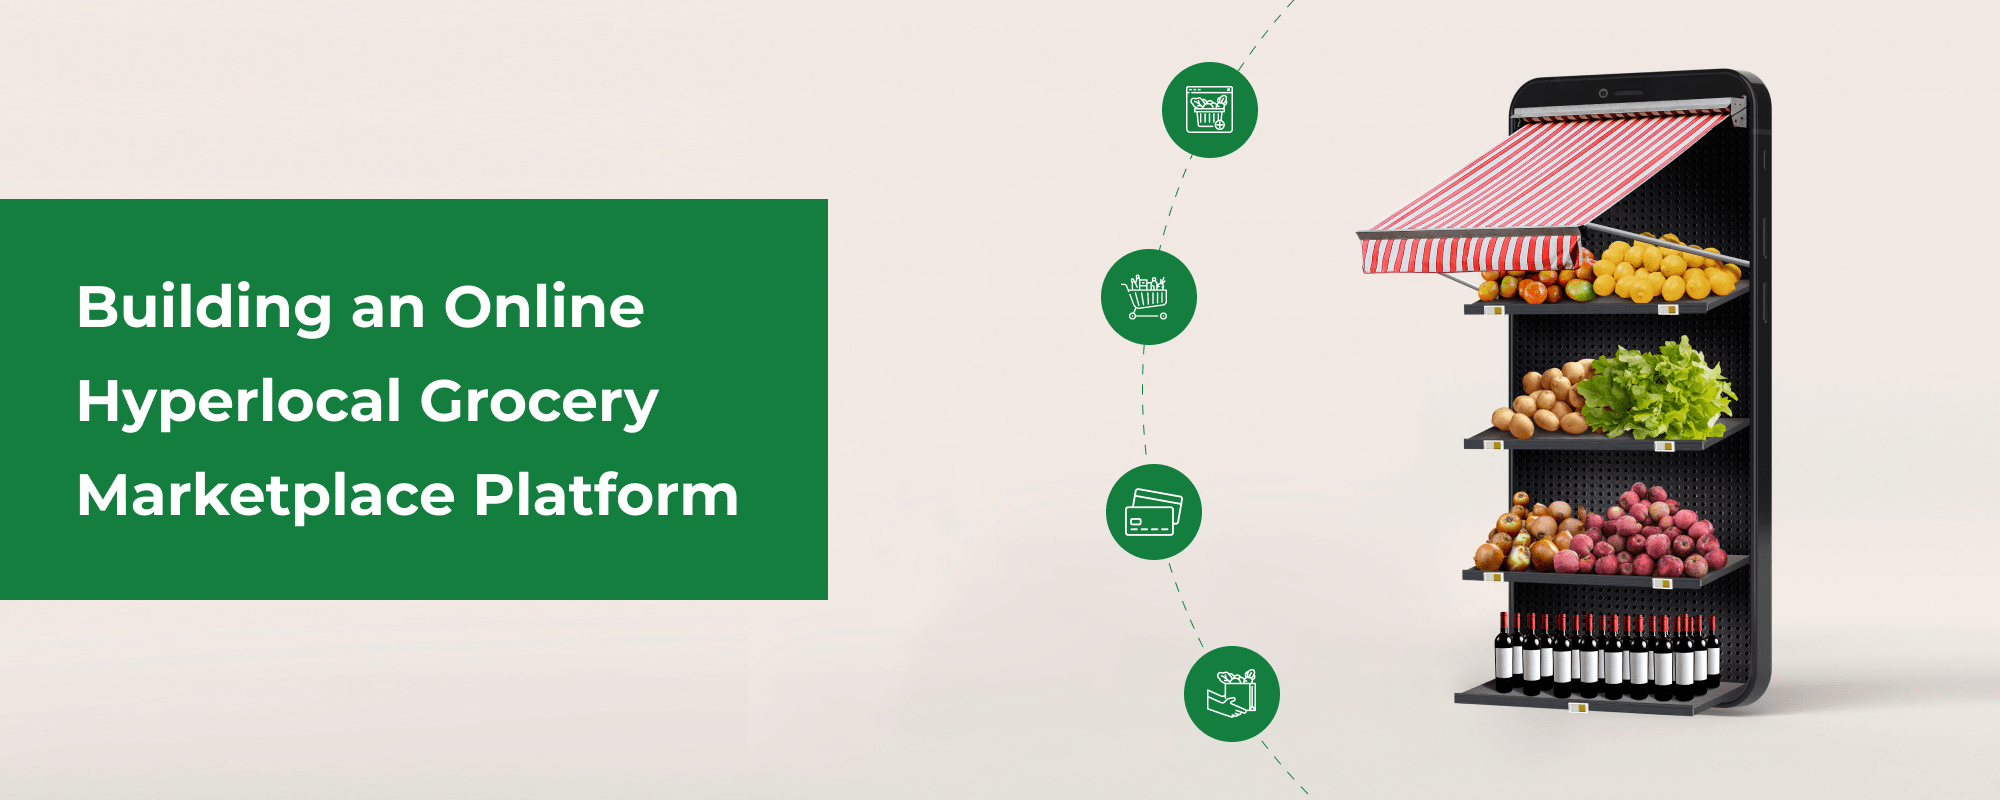 How to Build an Online Hyperlocal Grocery Marketplace Platform